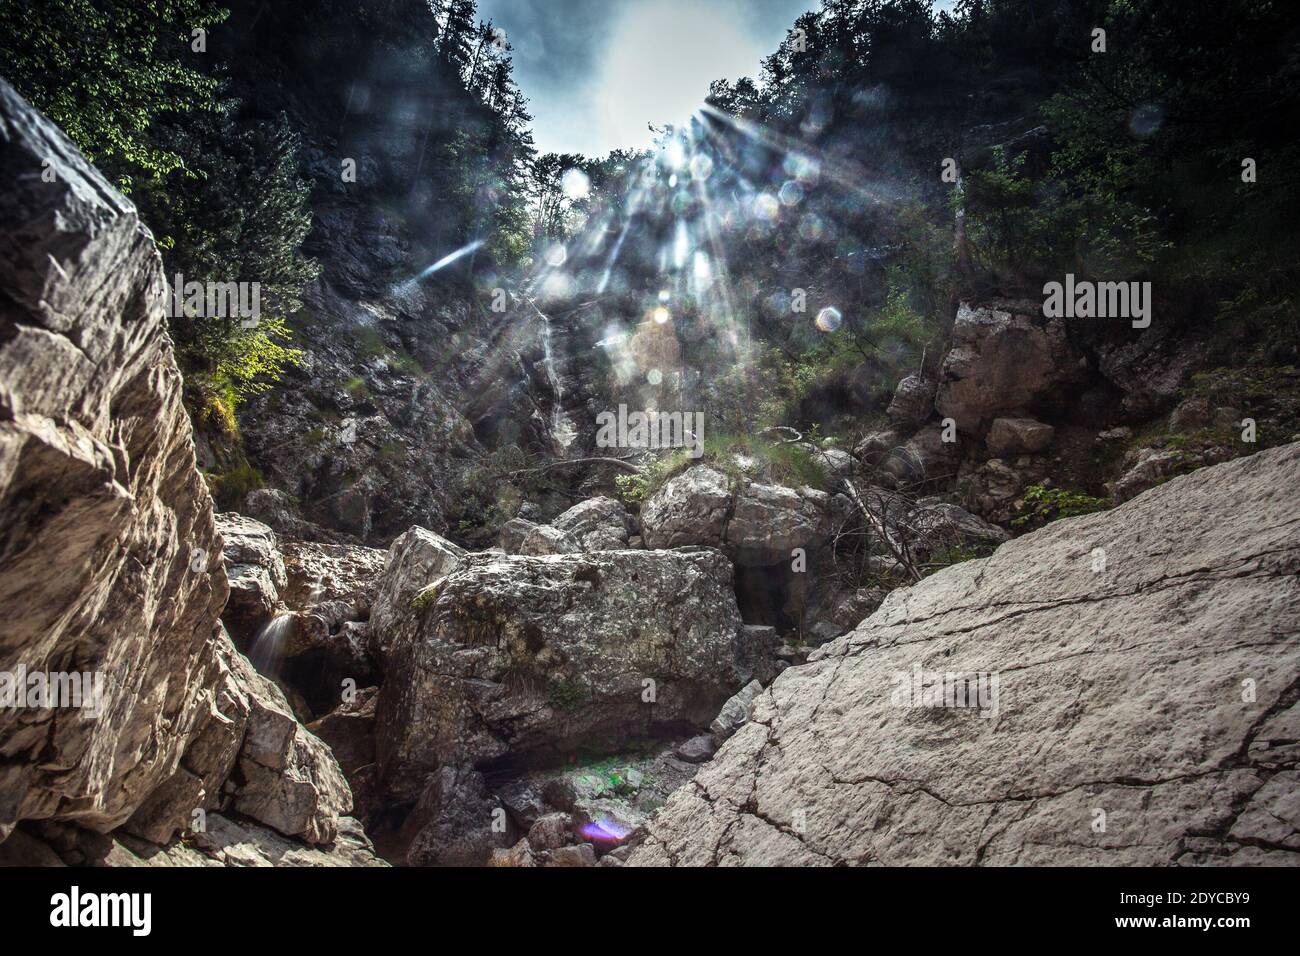 Rocky gorge filled with large boulders on whose surface there is a dinosaur footprint, Monte Resettum, Friuli, Italy. Shooting against the light Stock Photo